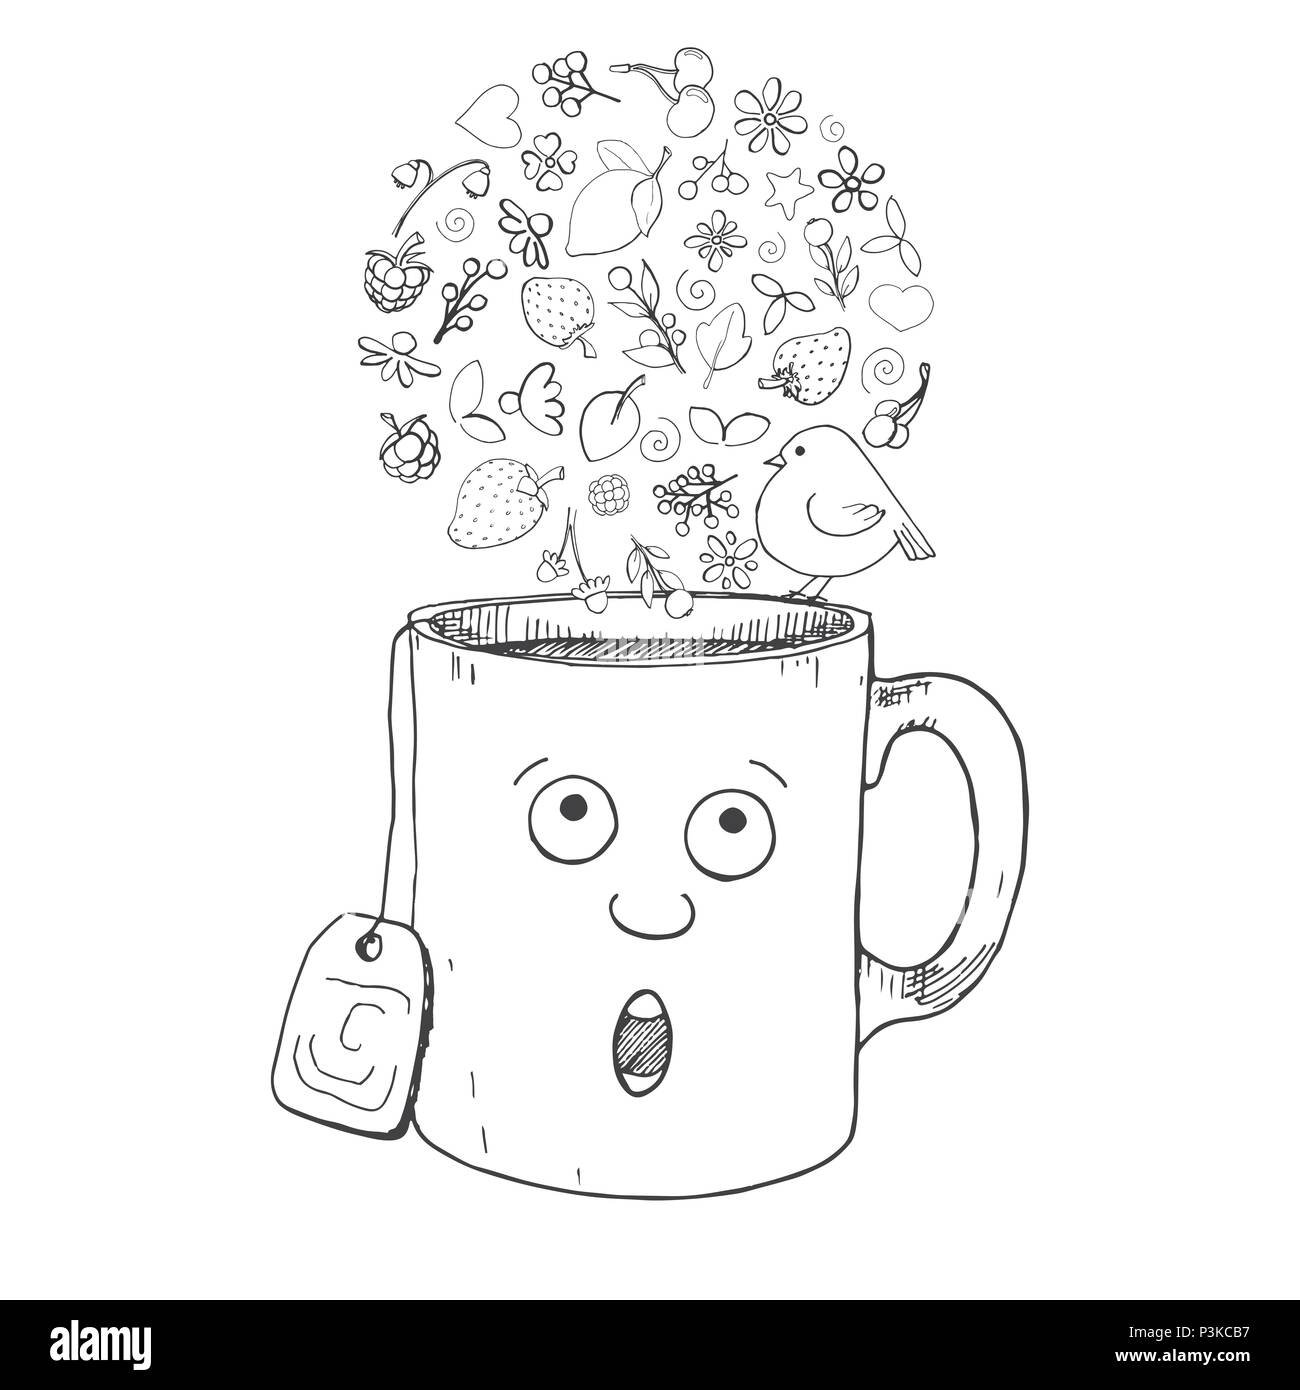 Hand drawn a cup in the cartoon style, different herbs, plants, berries and birds. Vector illustration of a sketch style. Stock Vector